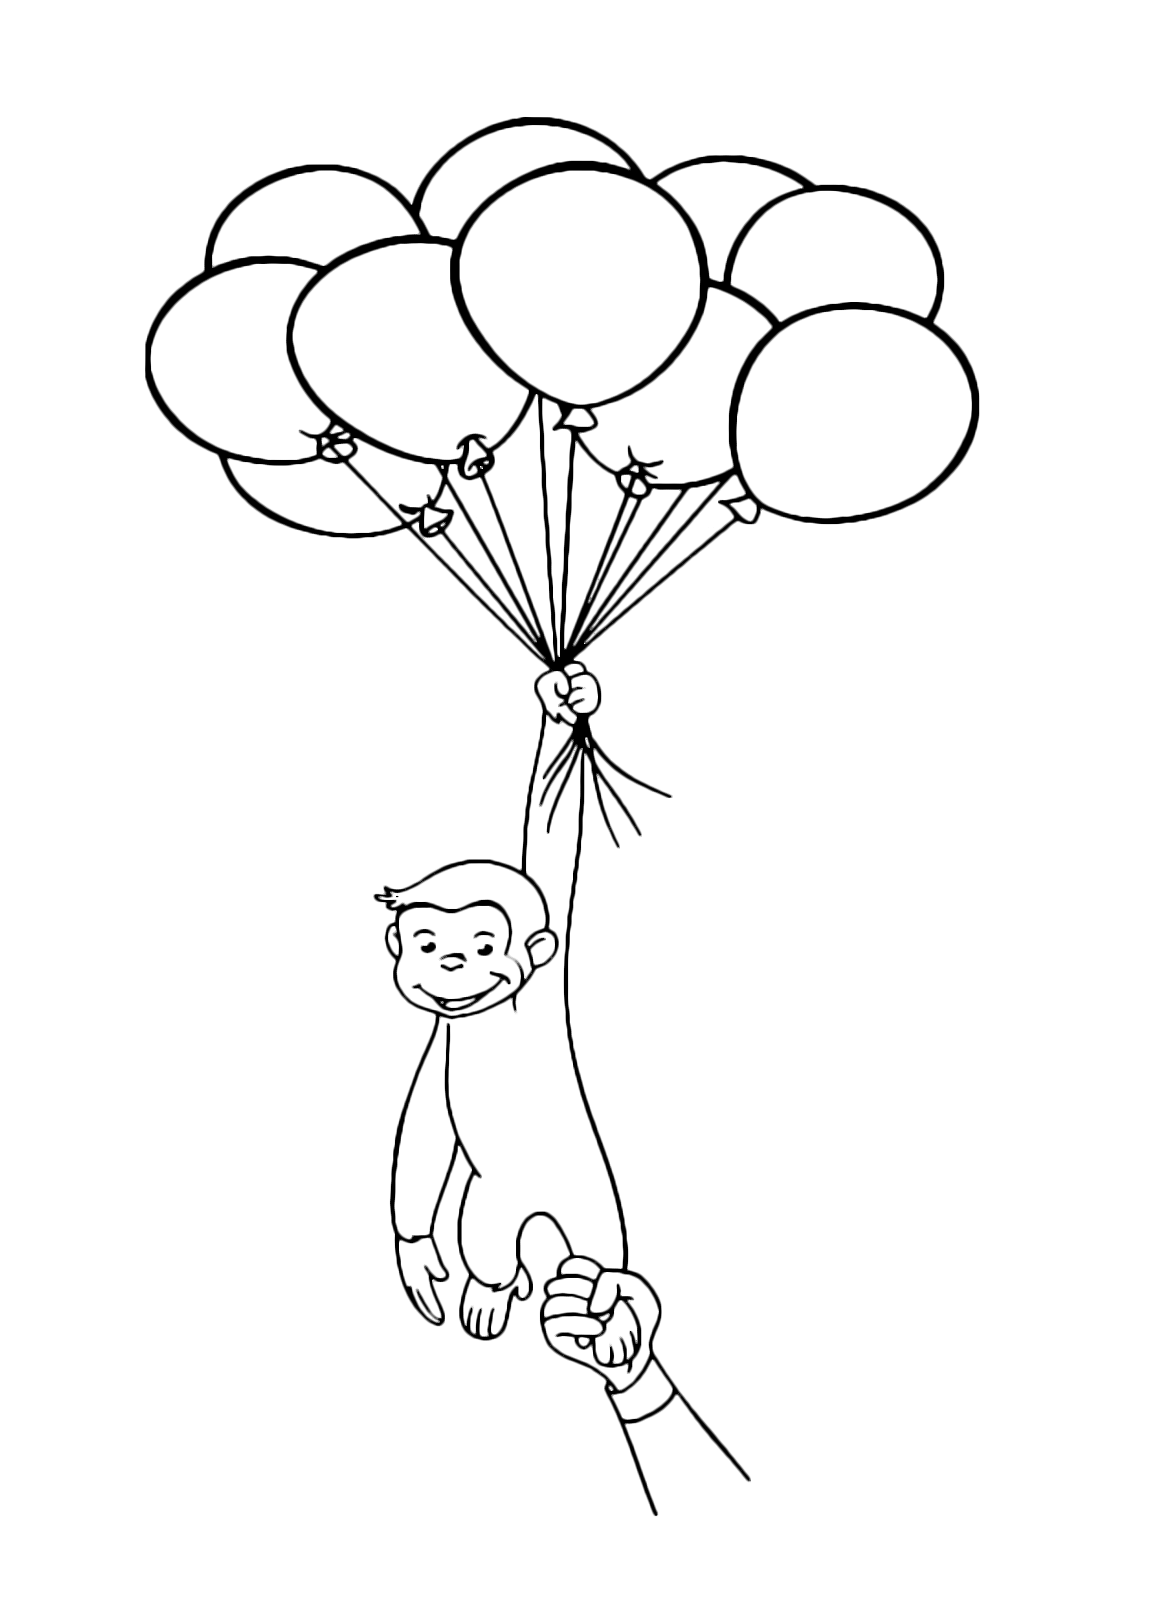 Curious George Balloon Coloring Page